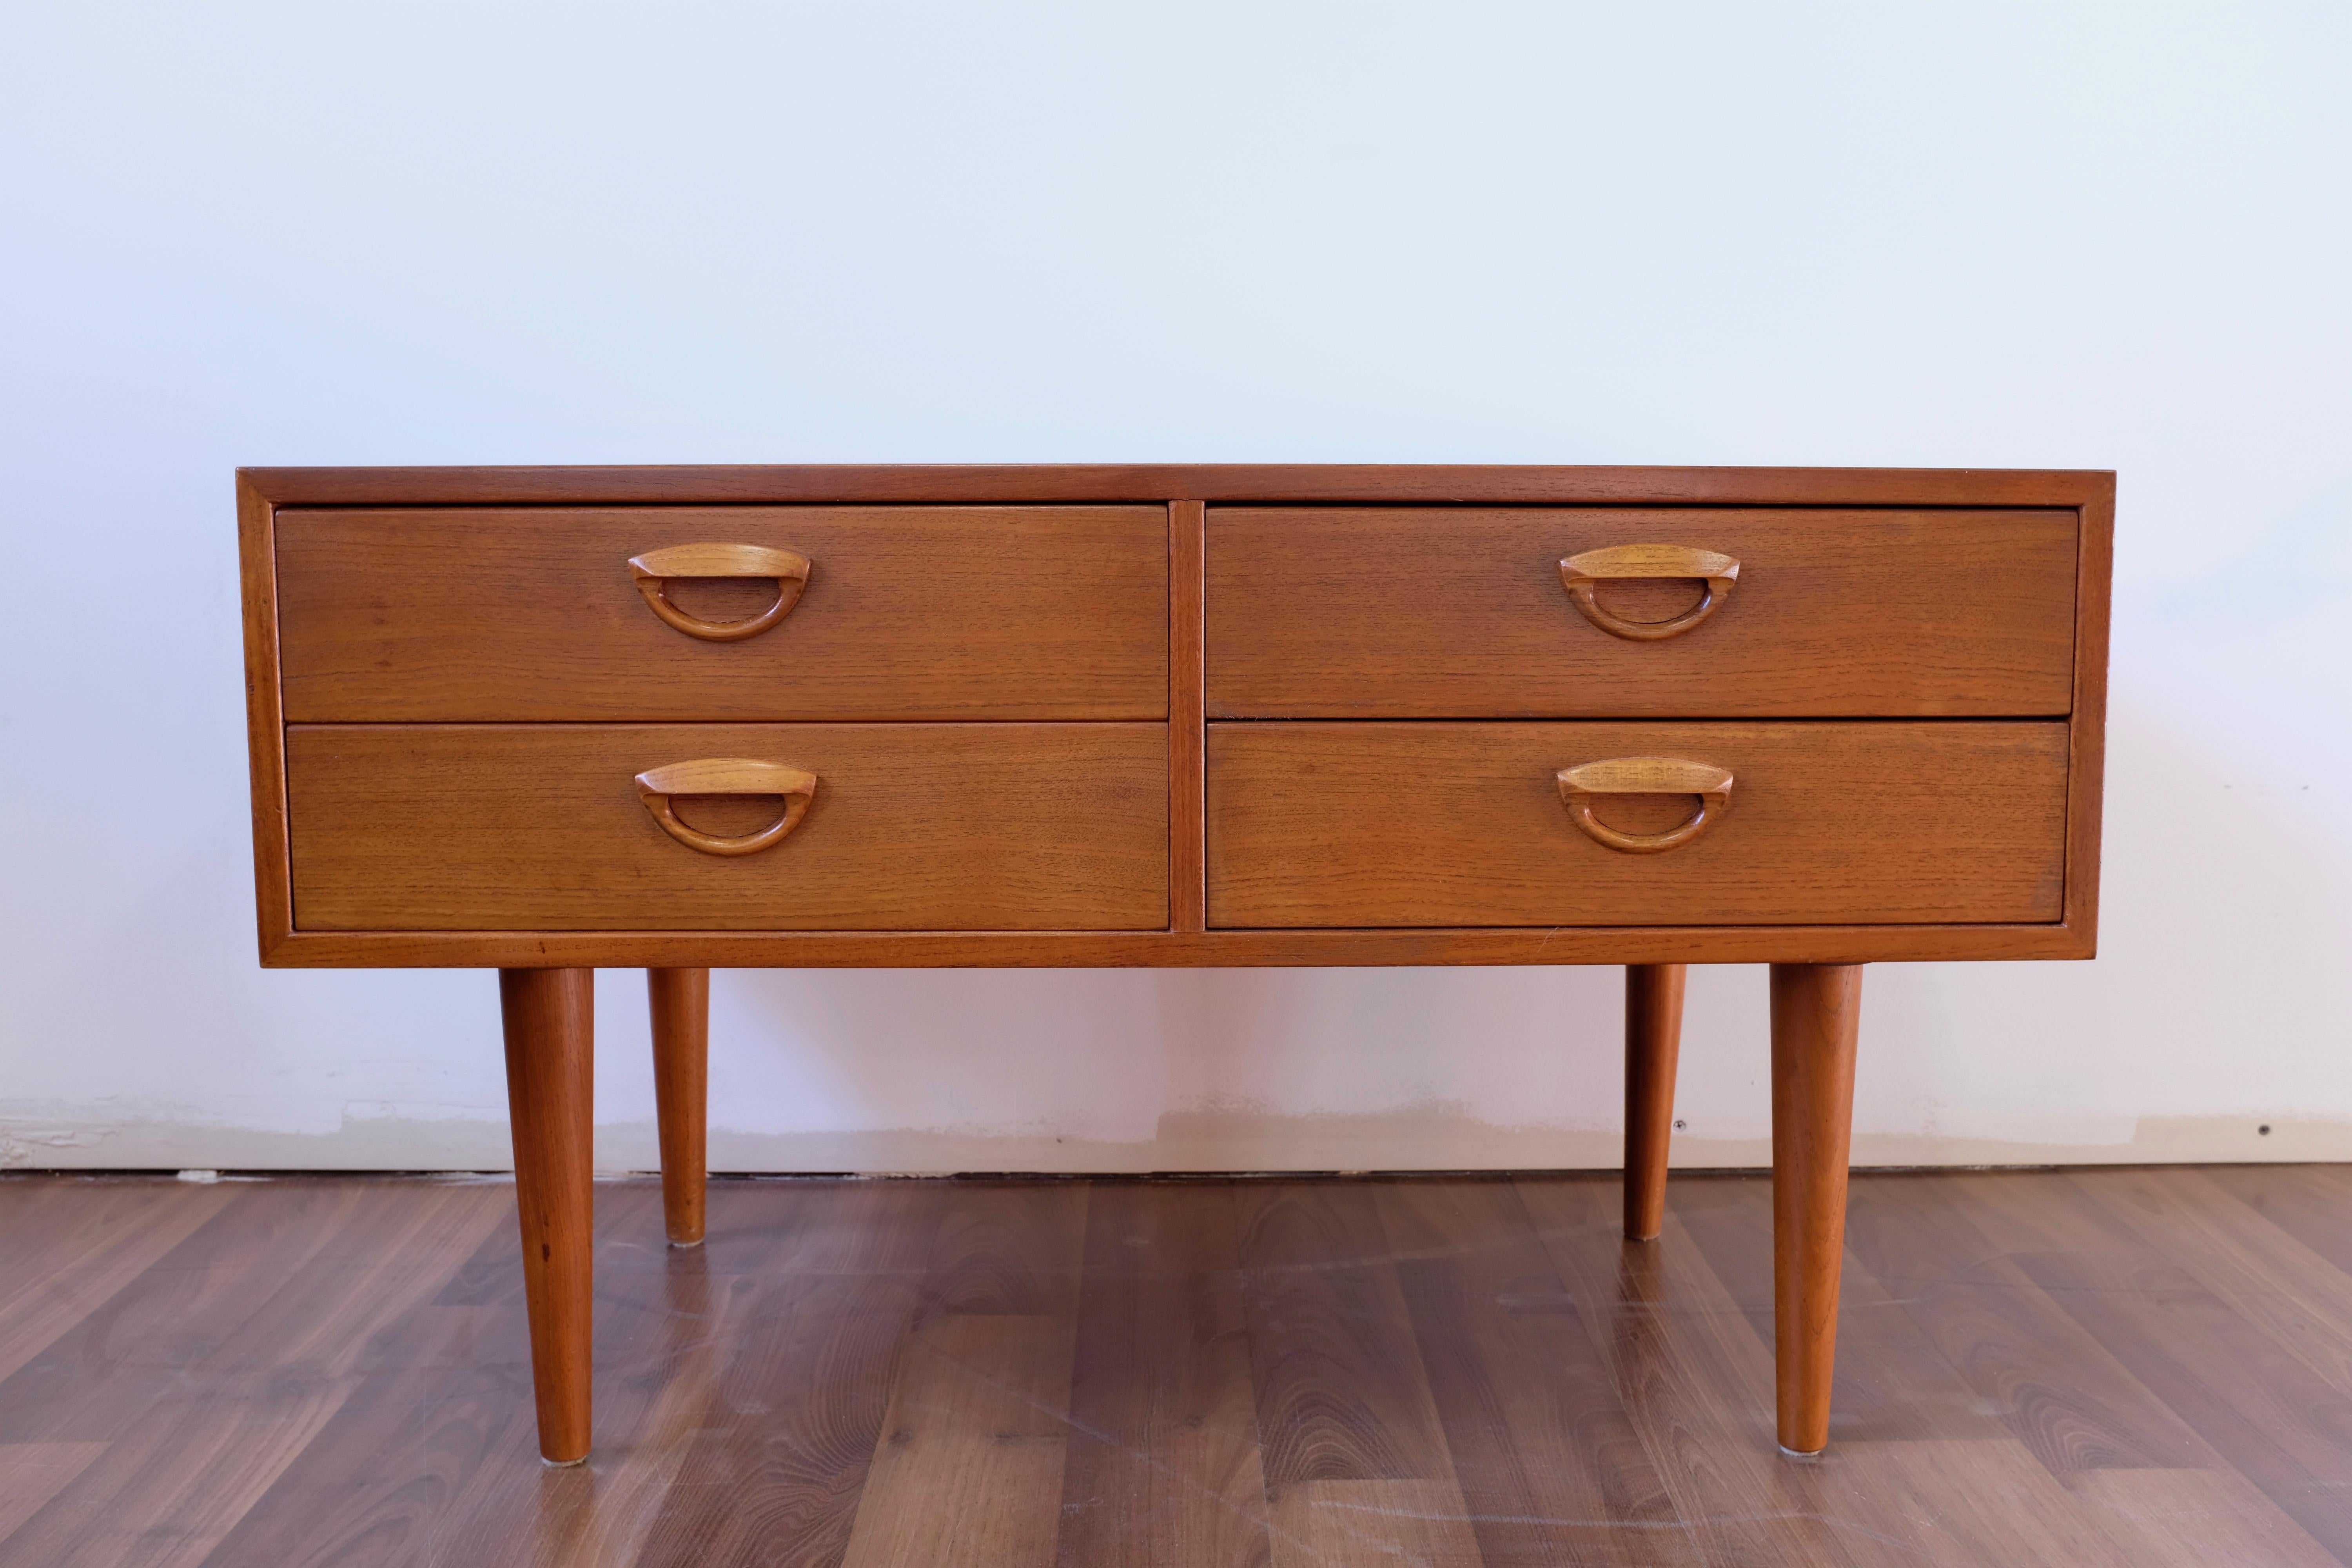 A low chest of drawers in teak designed by Kai Kristiansen, suitable as a dresser, nightstand or TV stand. Manufactured in Denmark by Feldballes Møbelfabrik.

The four solid wood drawers are constructed using dovetails and have elegant solid teak